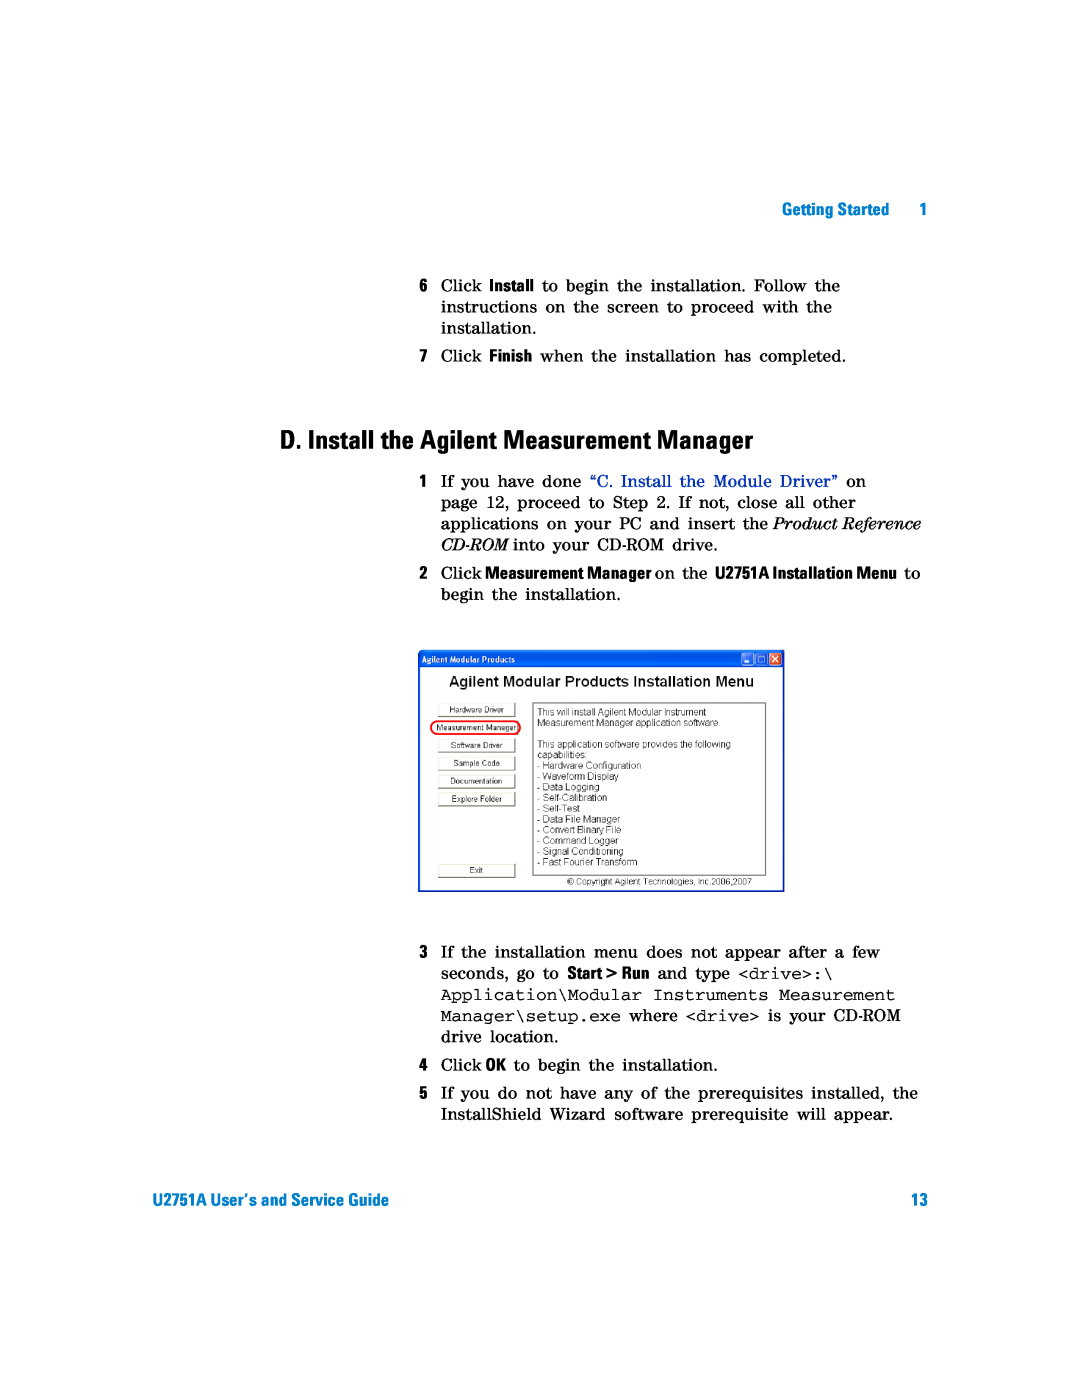 Agilent Technologies manual D. Install the Agilent Measurement Manager, U2751A User’s and Service Guide 